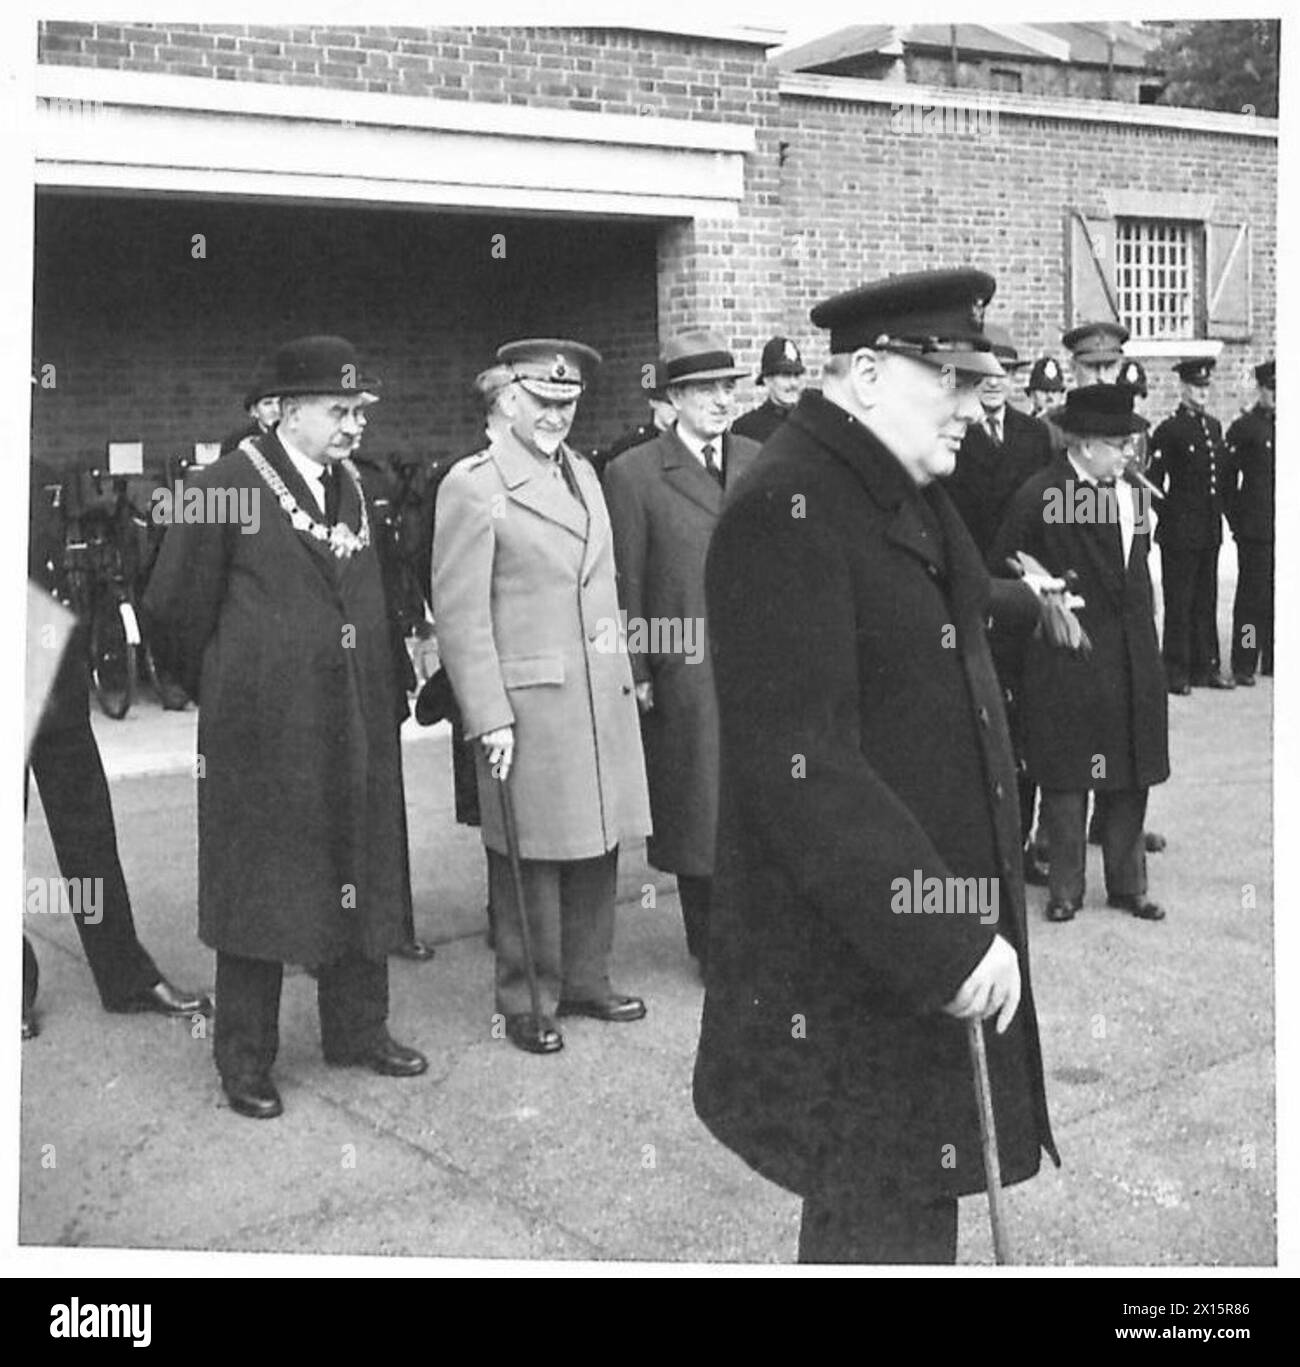 PRIME MINISTER AND FIELD MARSHAL SMUTS INSPECT DEFENCES - The Prime Minister addressing Civil Defence Workers. In the background can be seen the Mayor of Dover, Field Marshal Smuts the Turkish Ambassador and Sir Kingsley Wood British Army Stock Photo